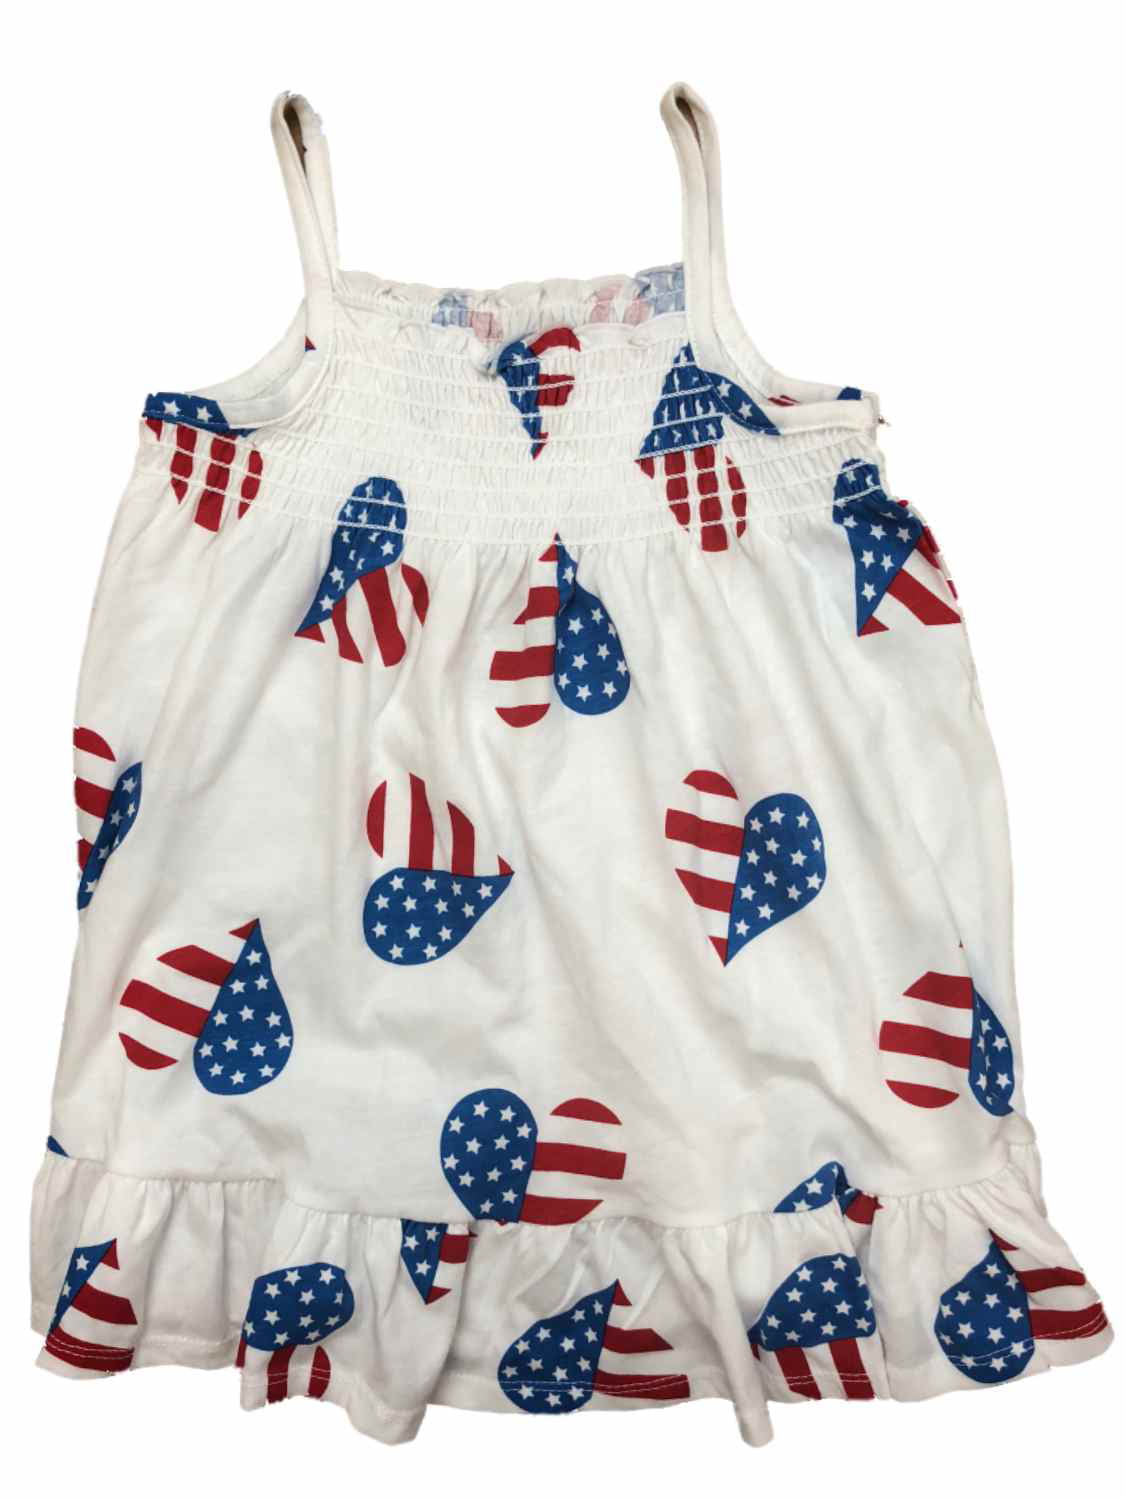 Gymboree Dress Size 3T Patriotic Red White Blue 4th of July Striped Rosette NEW 